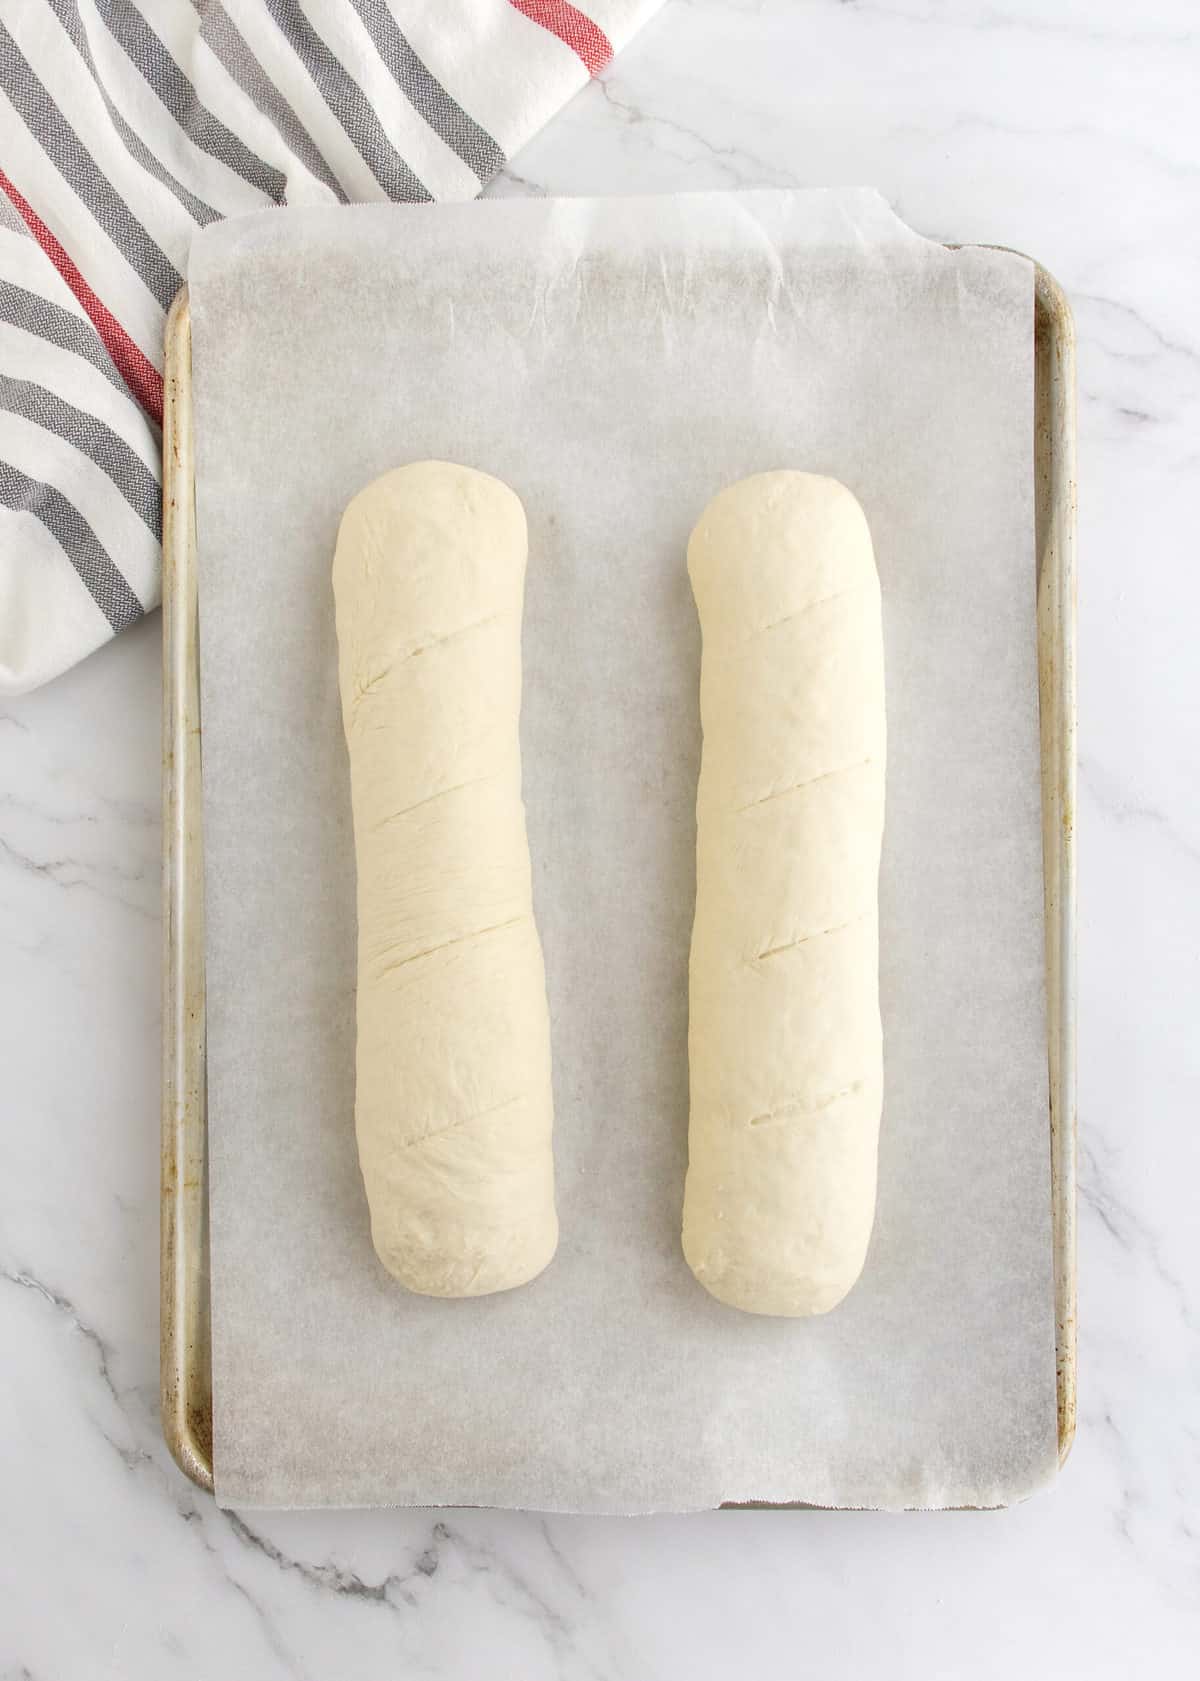 5-Ingredient Homemade French Bread by The BakerMama